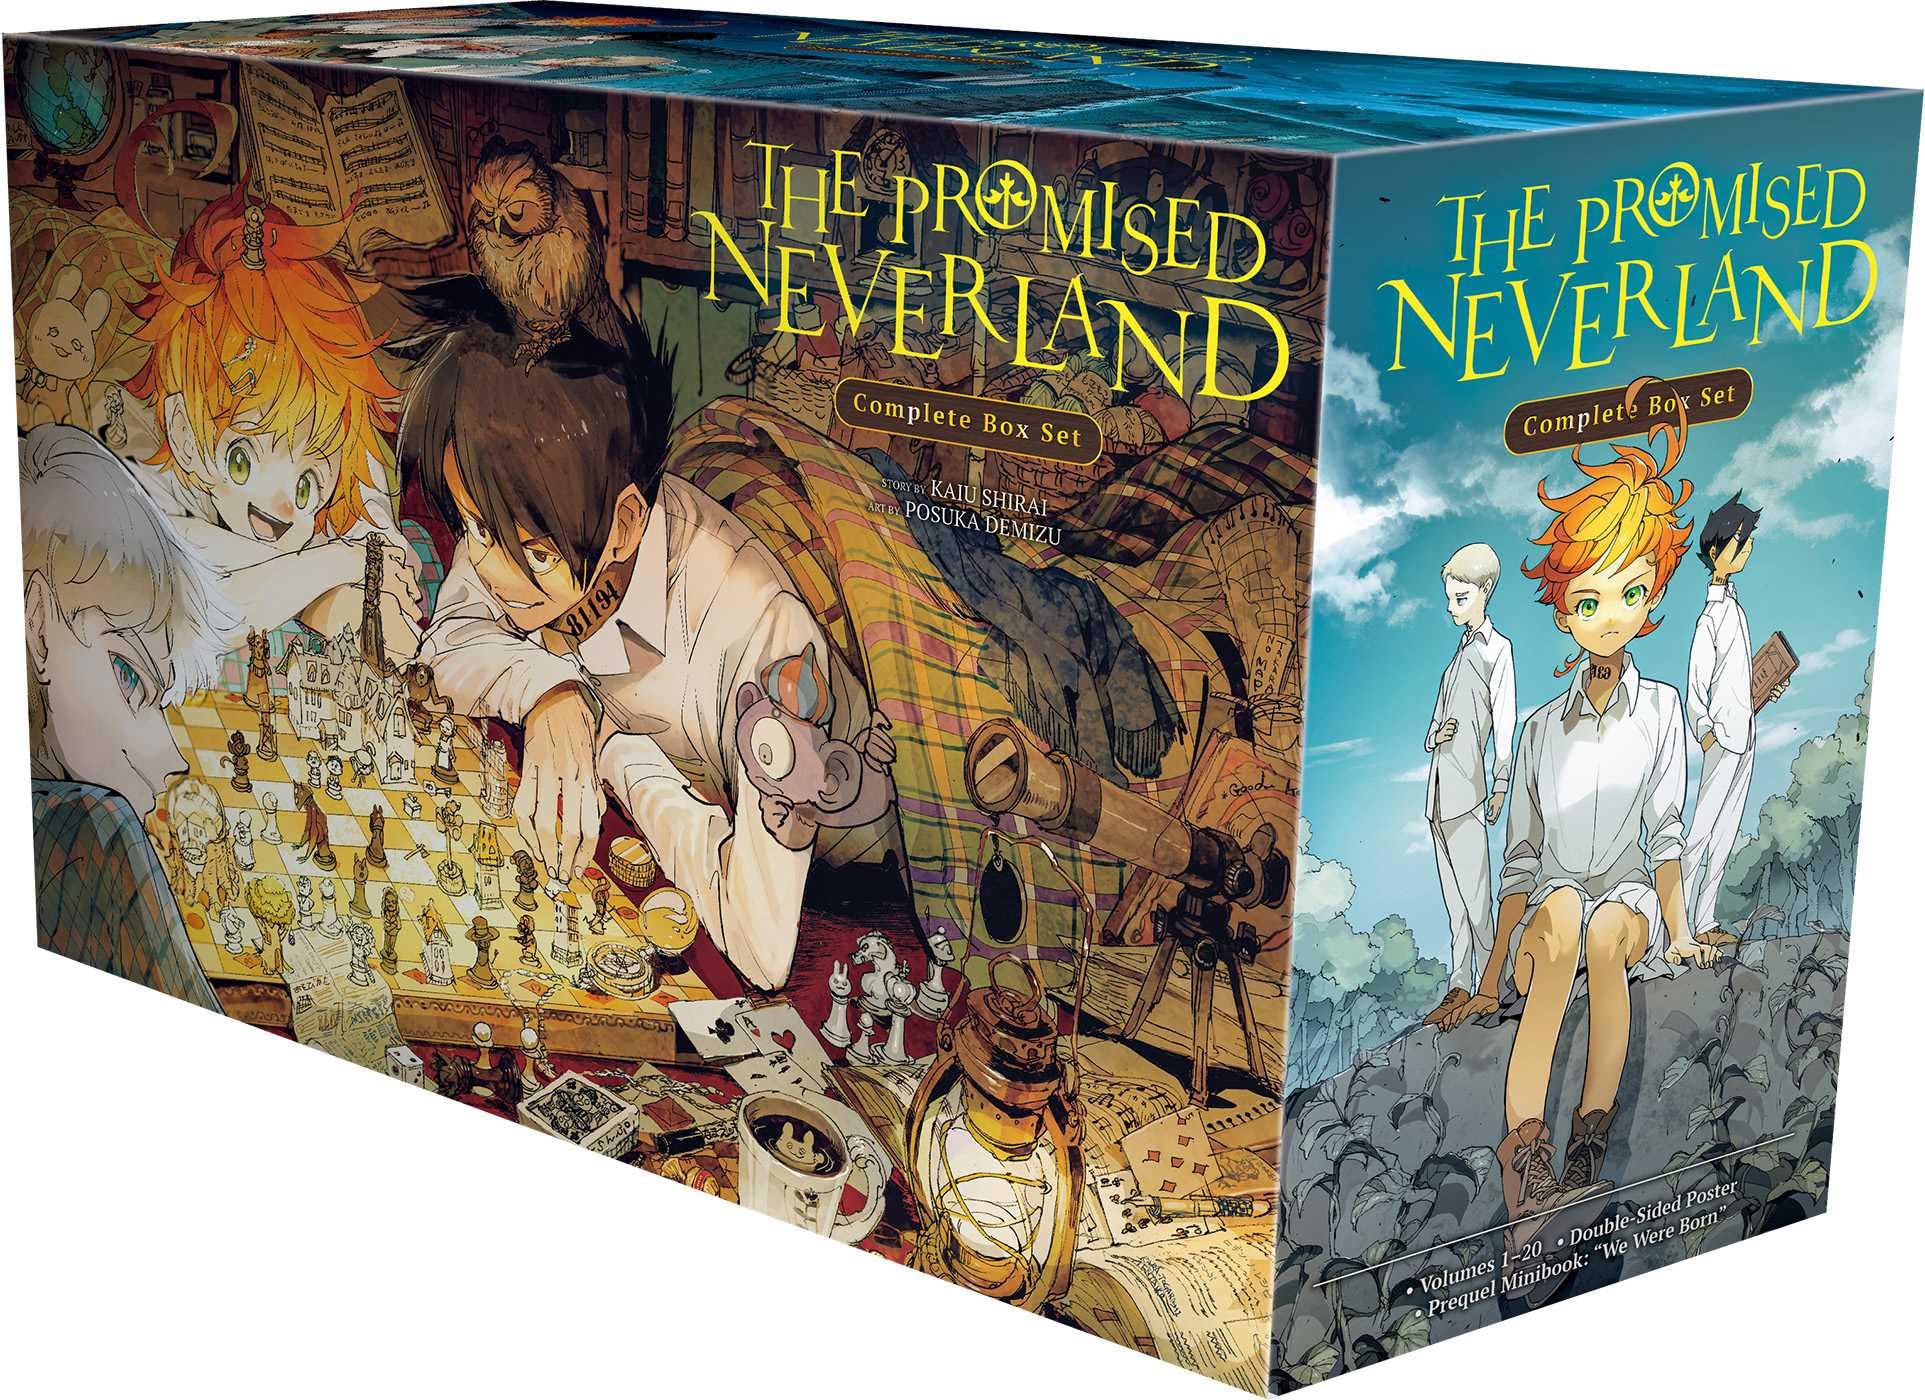 The Promised Neverland Complete Box Set: Includes Volumes 1-20 with Premium